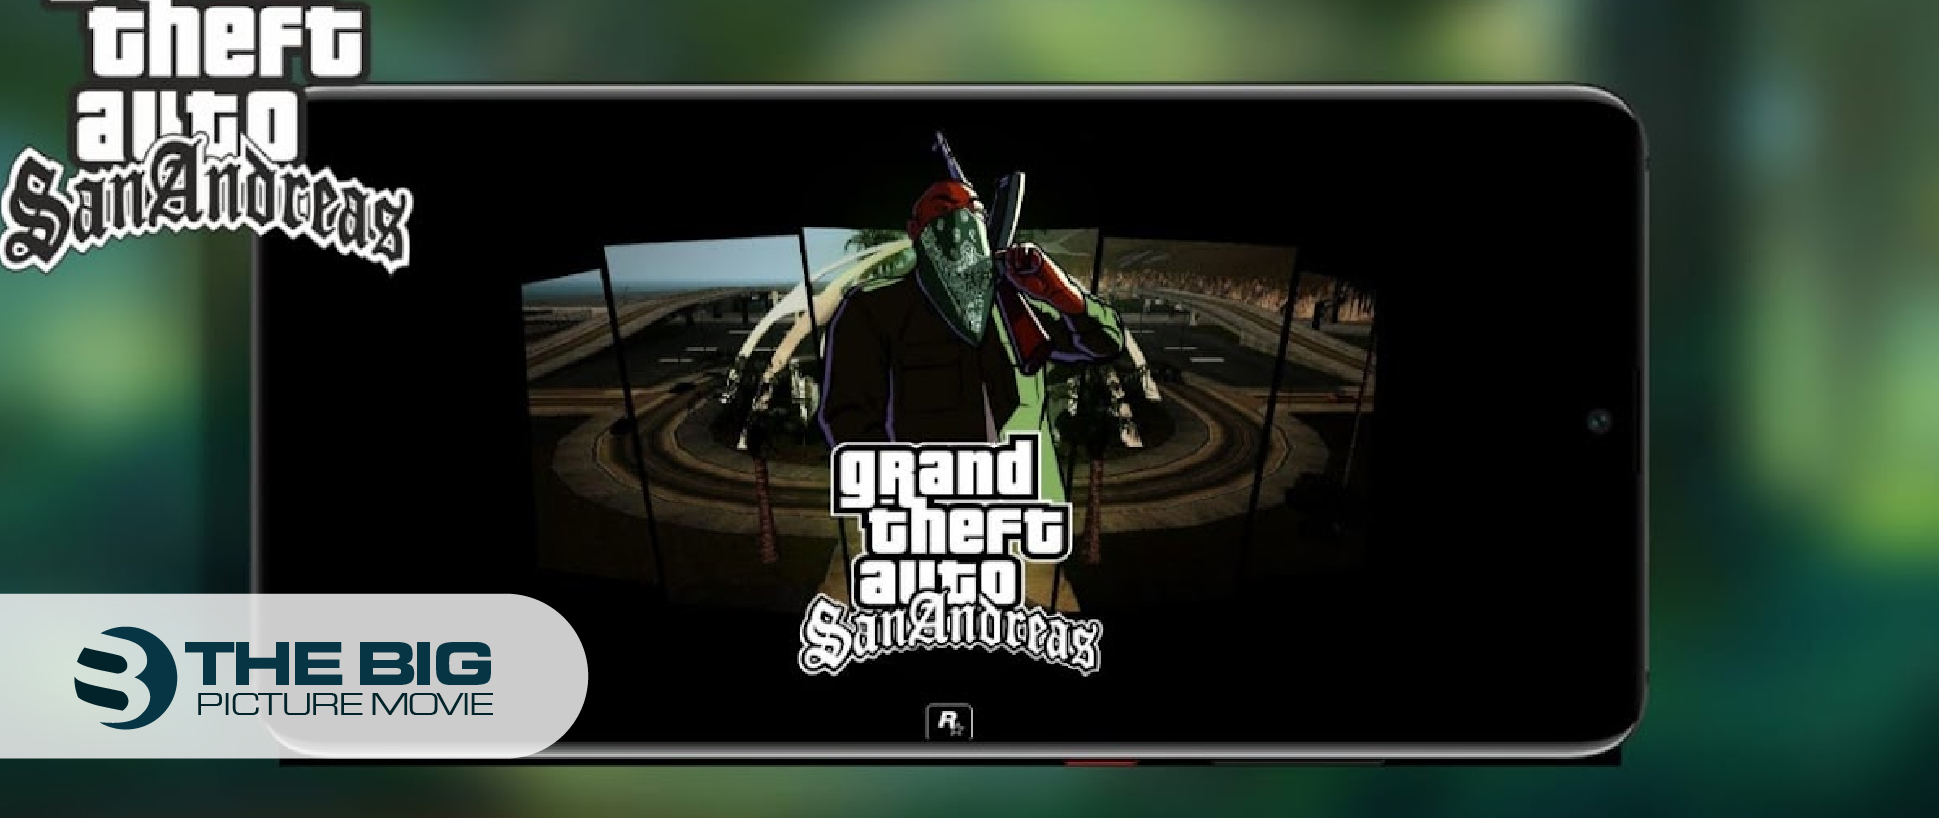 How to Download Gta San Andreas on Android Easy